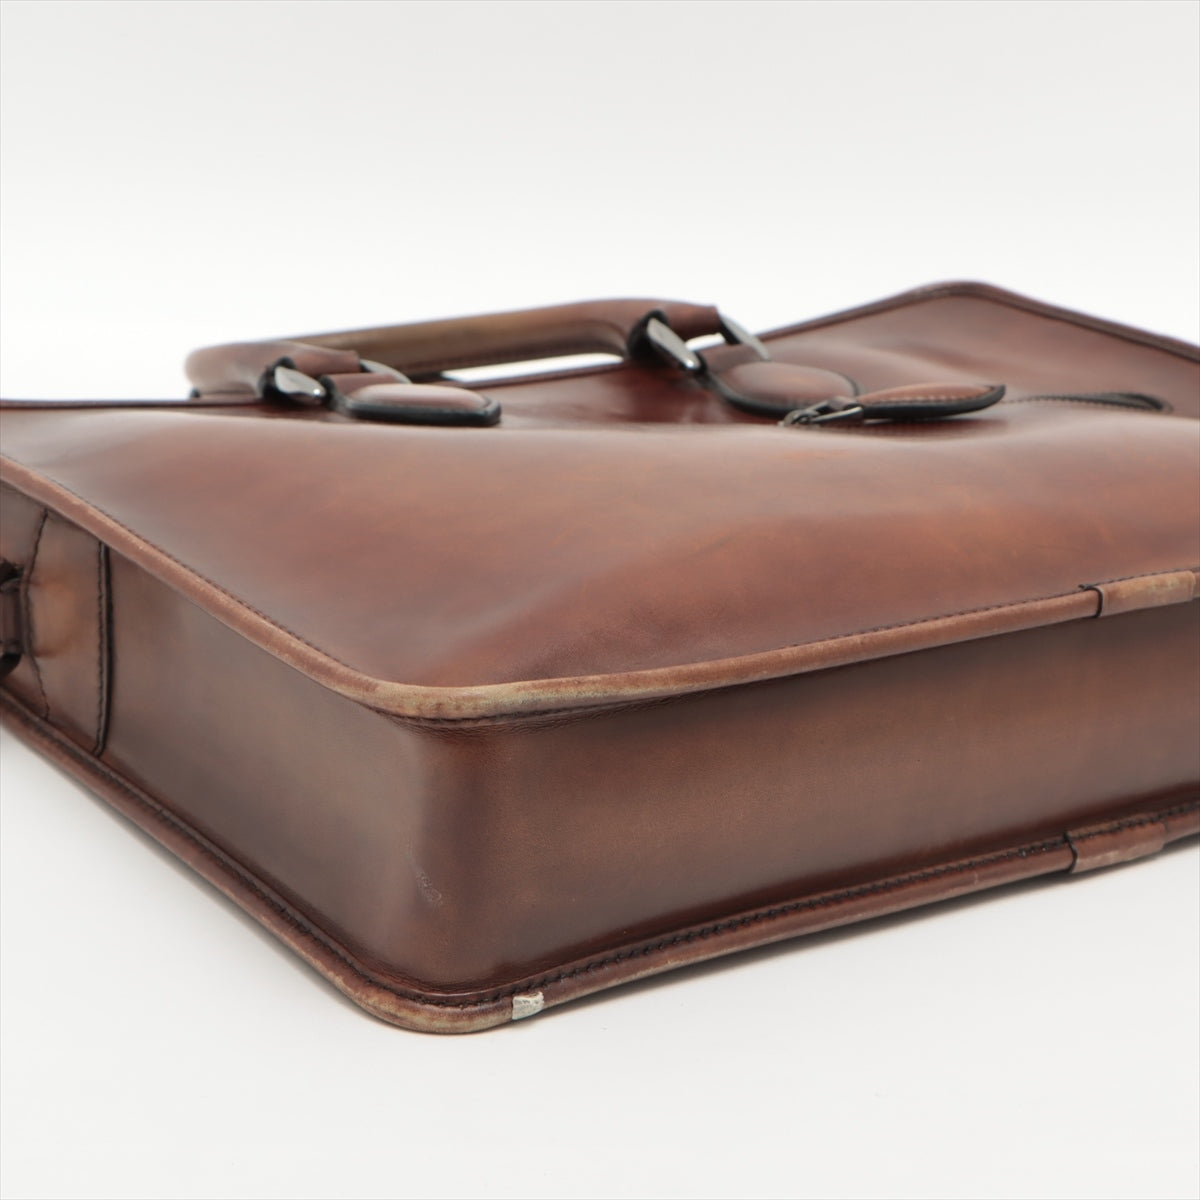 Berluti Calligraphy Un Jour Gulliver Leather Business bag Brown